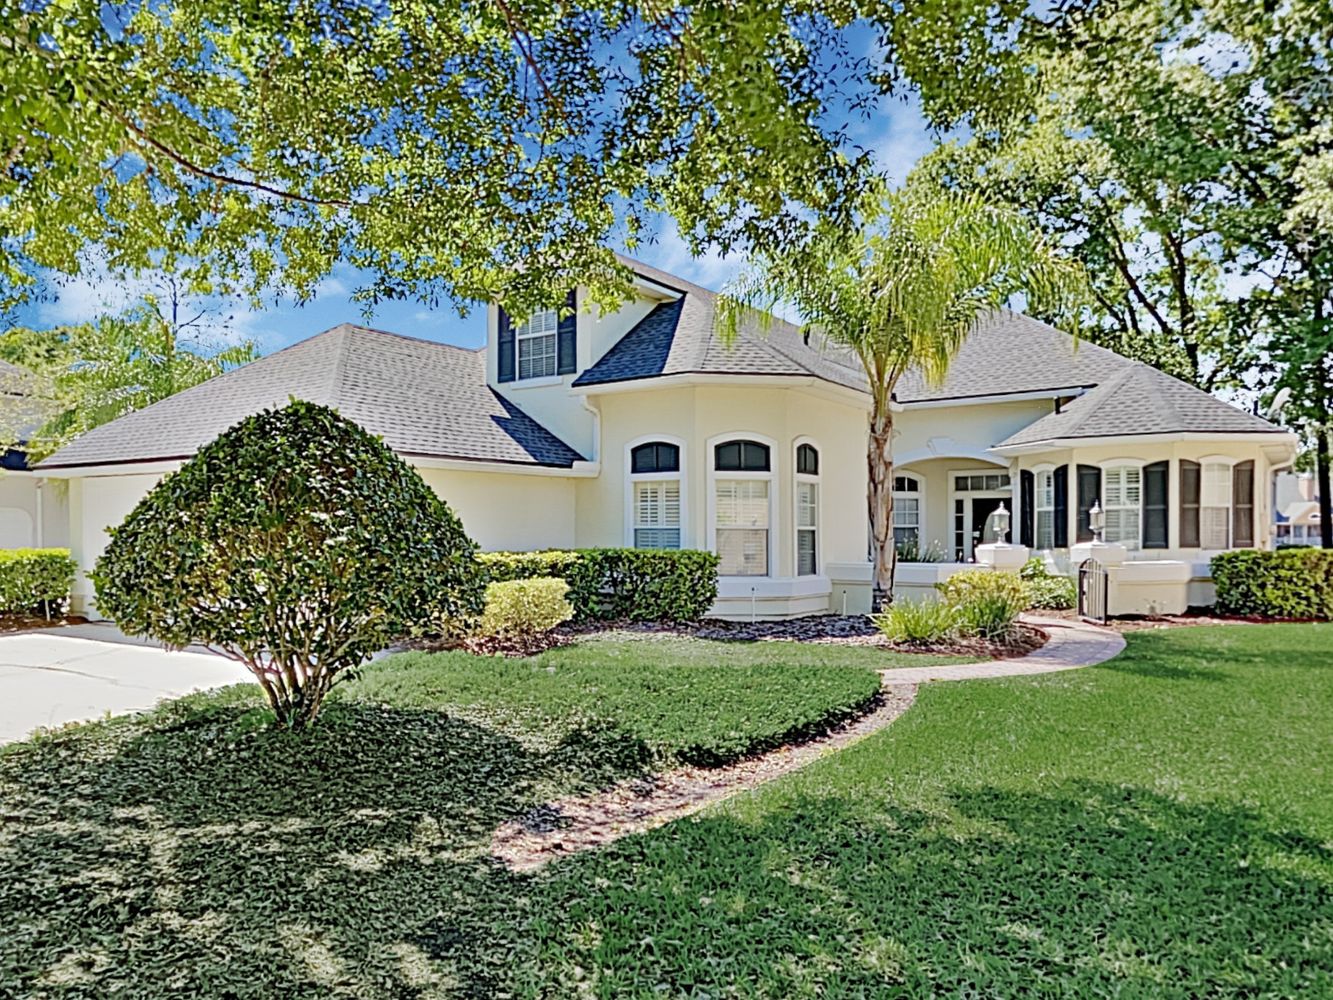 Stunning home with gorgeous landscaping at Invitation Homes Jacksonville.